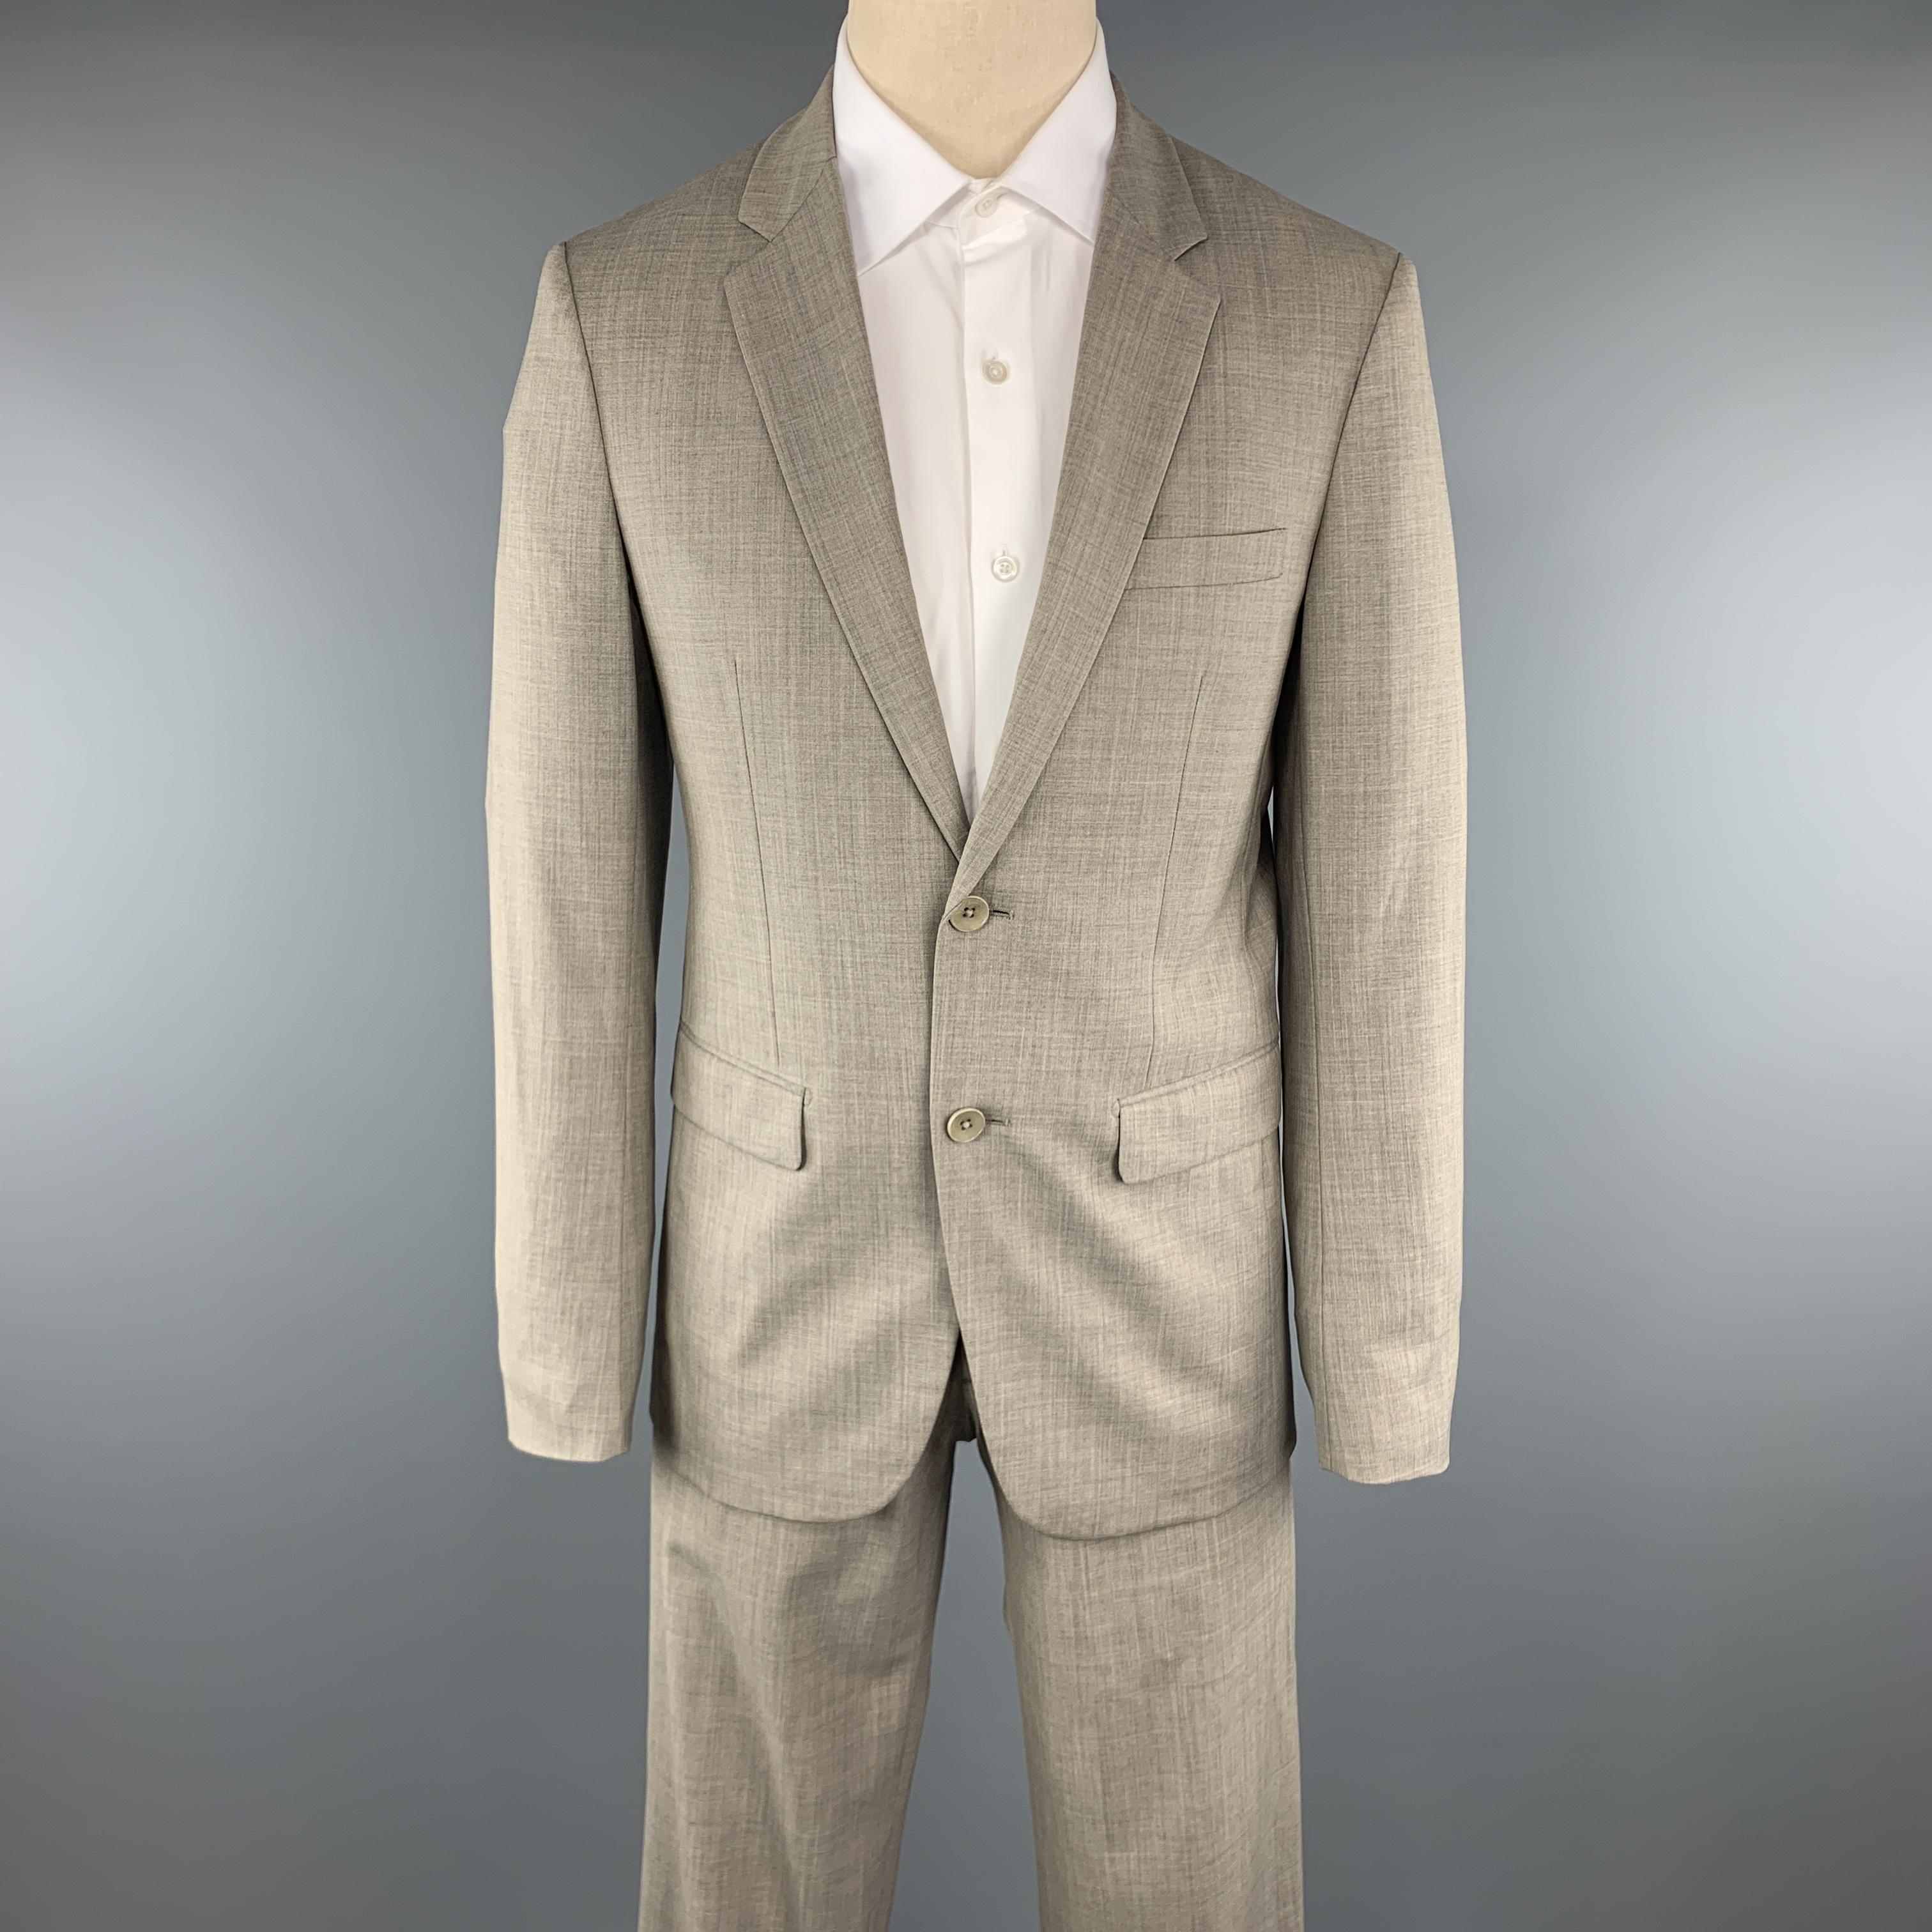 THEORY Suit comes in a gray wool and includes a single breasted, two button sport coat with a notch lapel and matching front trousers. 

Excellent Pre-Owned Condition.
Marked: 38

Measurements:

-Jacket
Shoulder: 17.5 in.
Chest: 38 in. 
Sleeve: 26